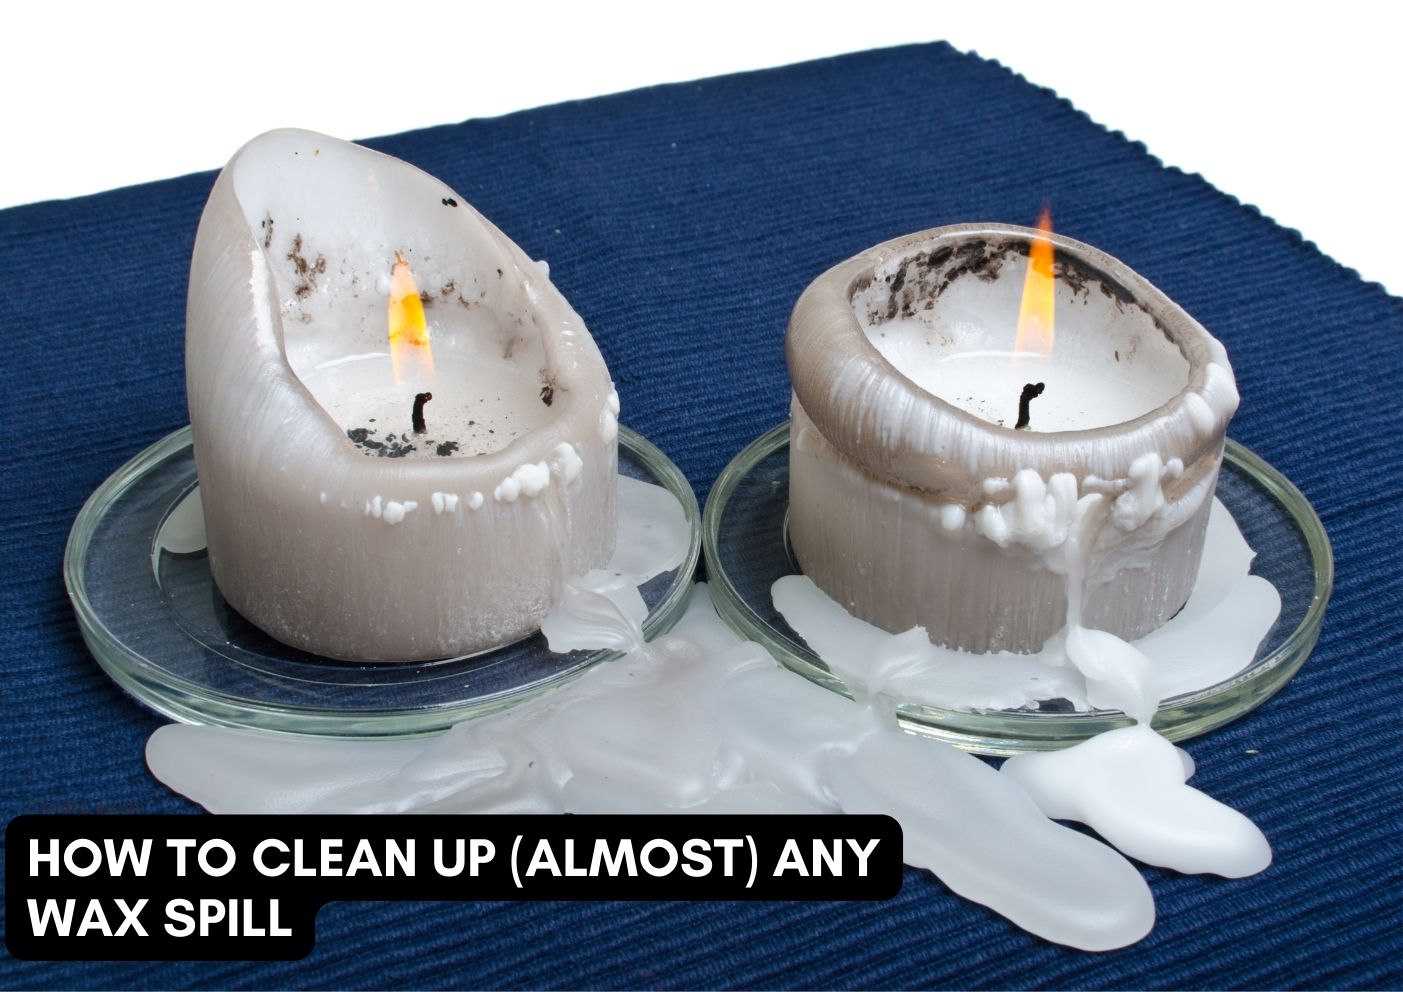 How To Clean Up (Almost) Any Wax Spill